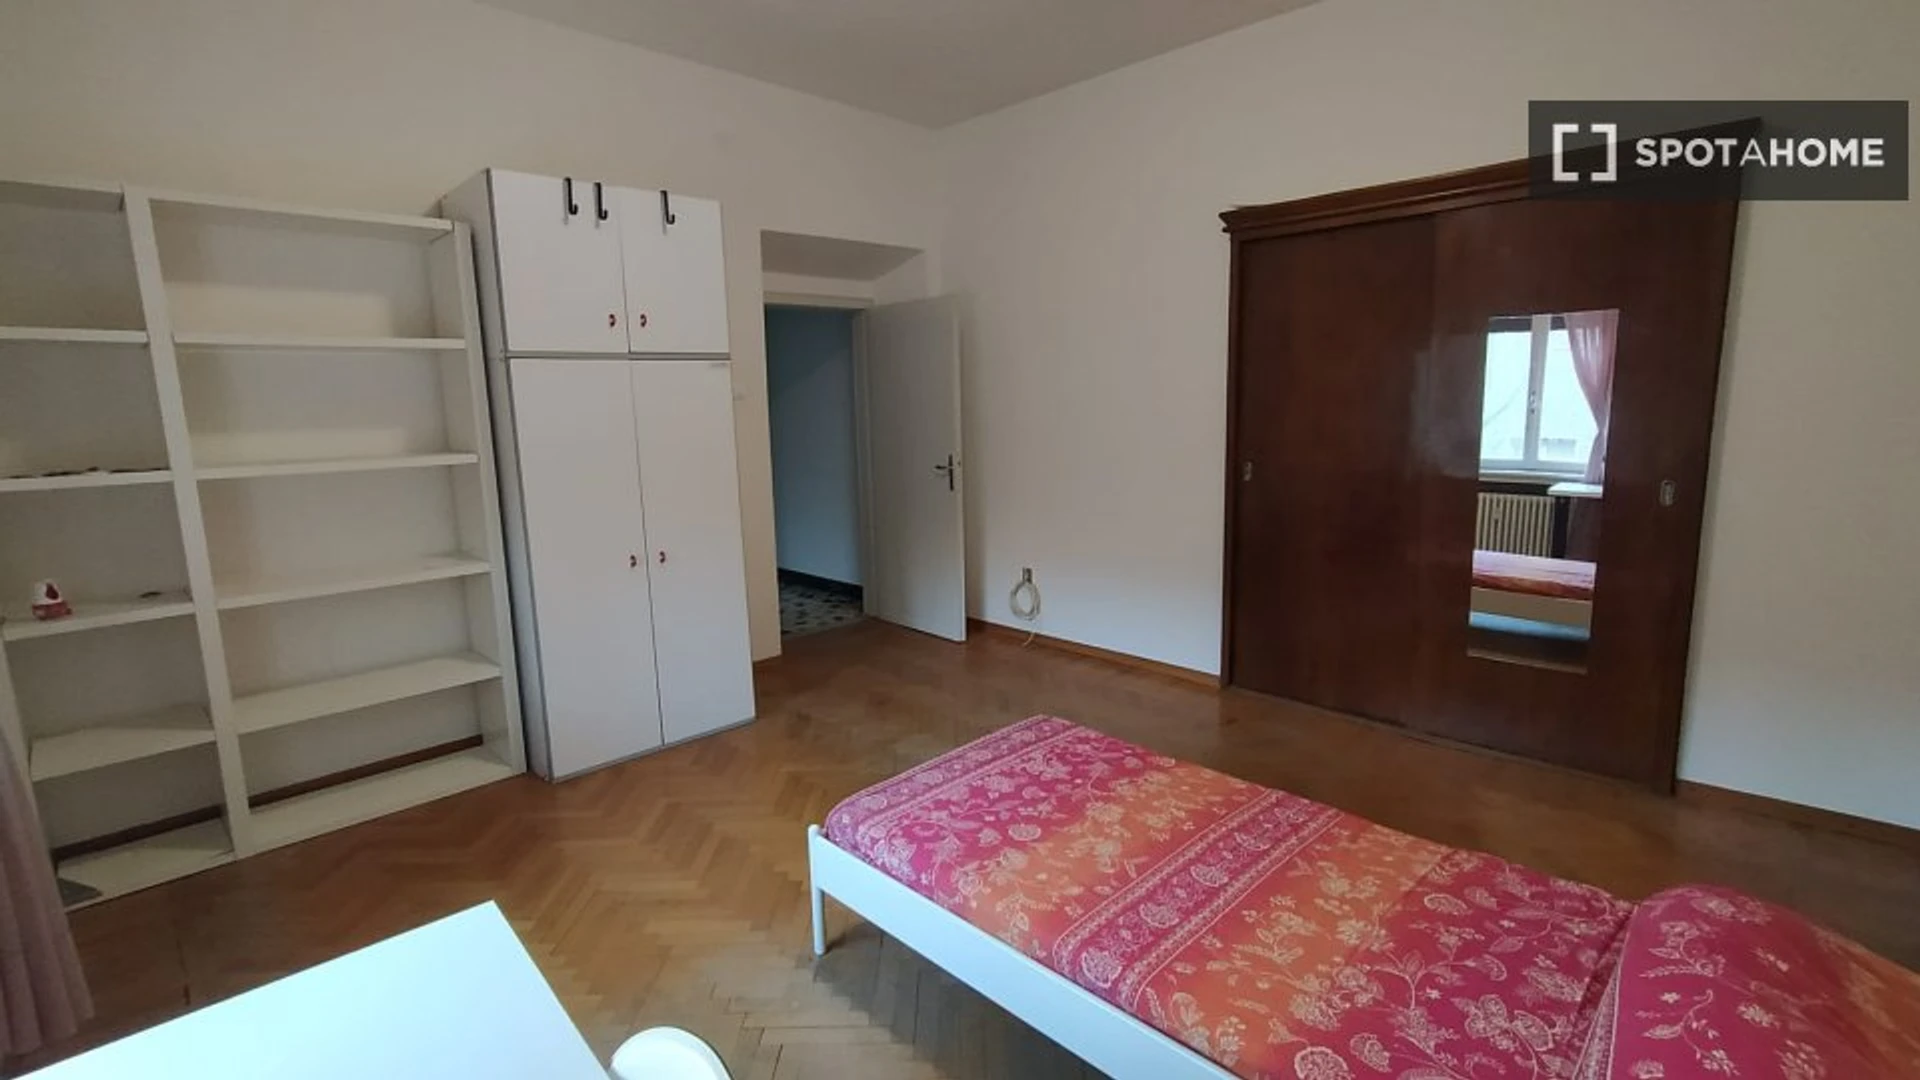 Helles Privatzimmer in Trient